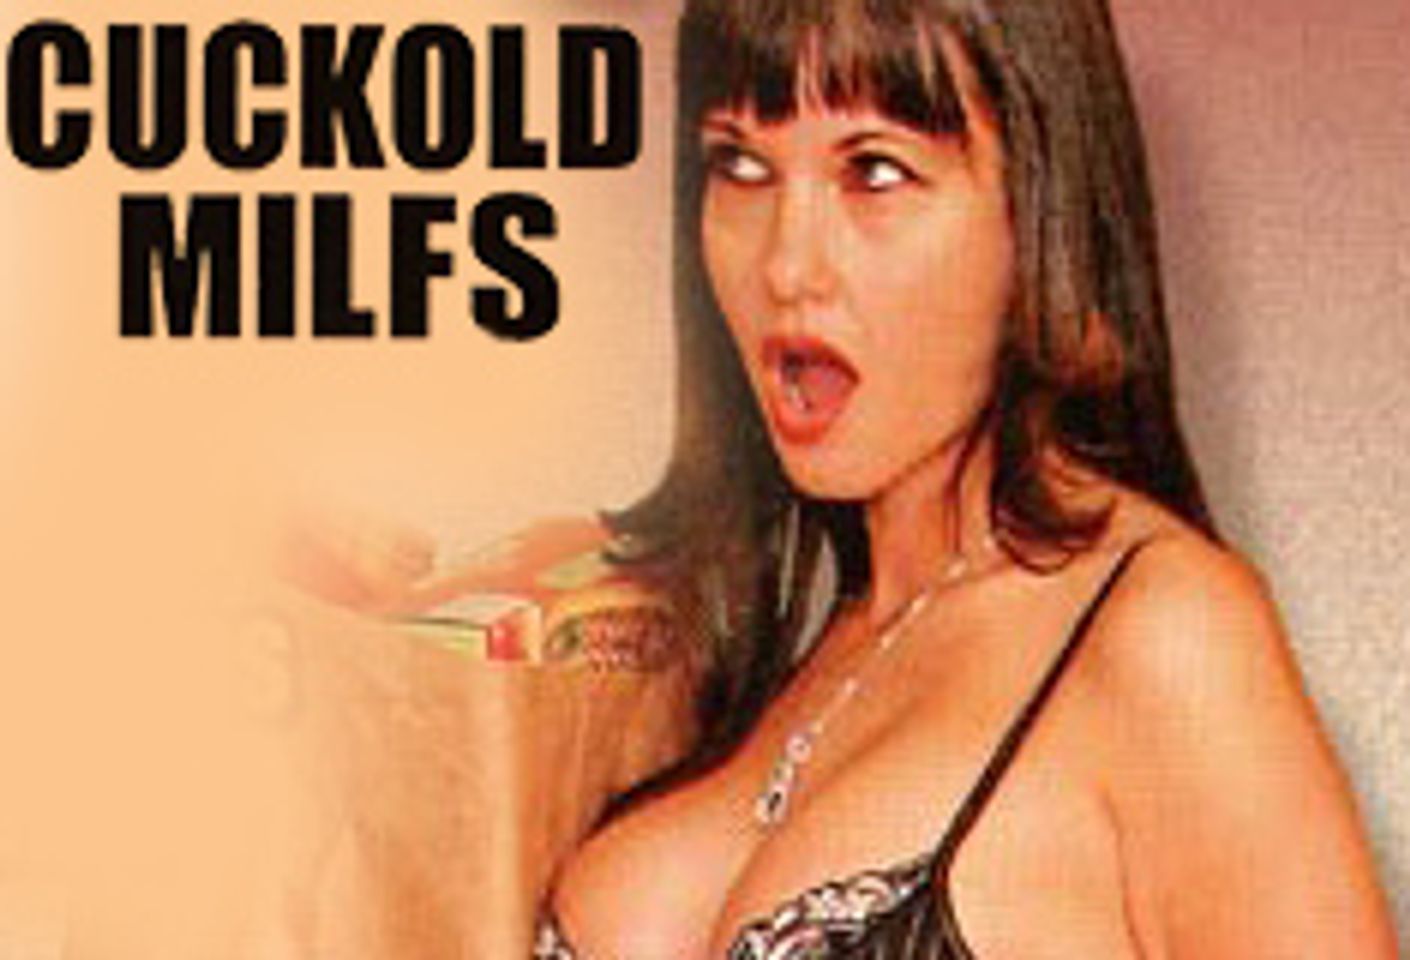 Chatsworth Pictures Releases <i>Cuckold MILFs</i>